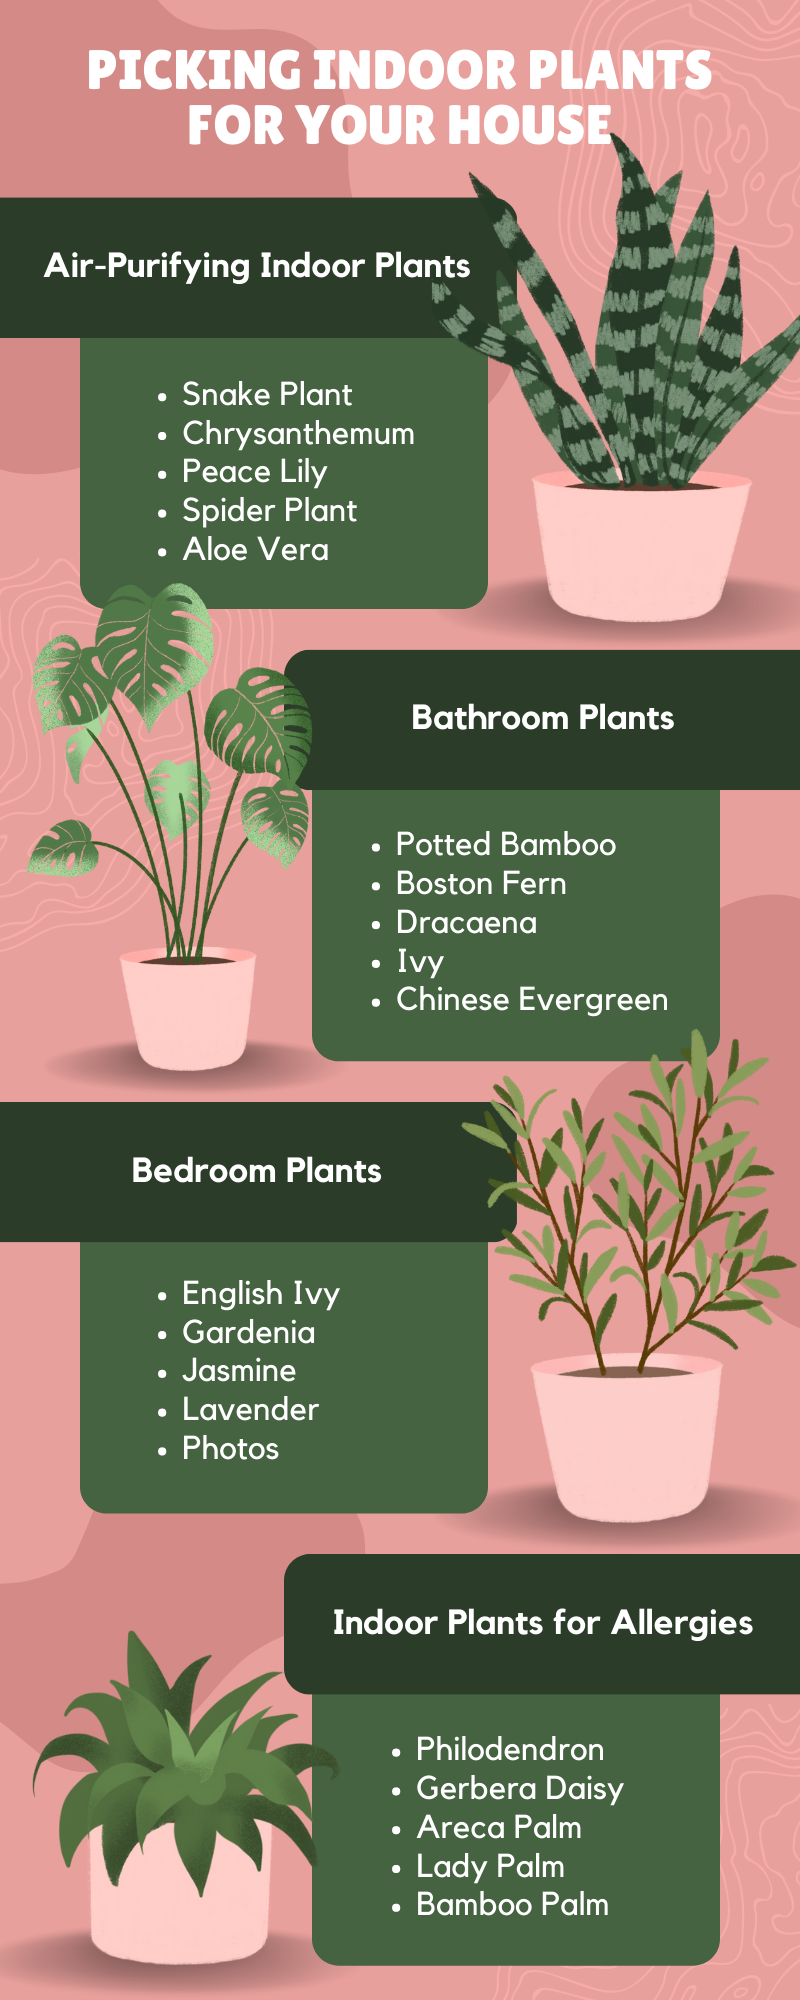 PICKING INDOOR PLANTS FOR YOUR HOUSE